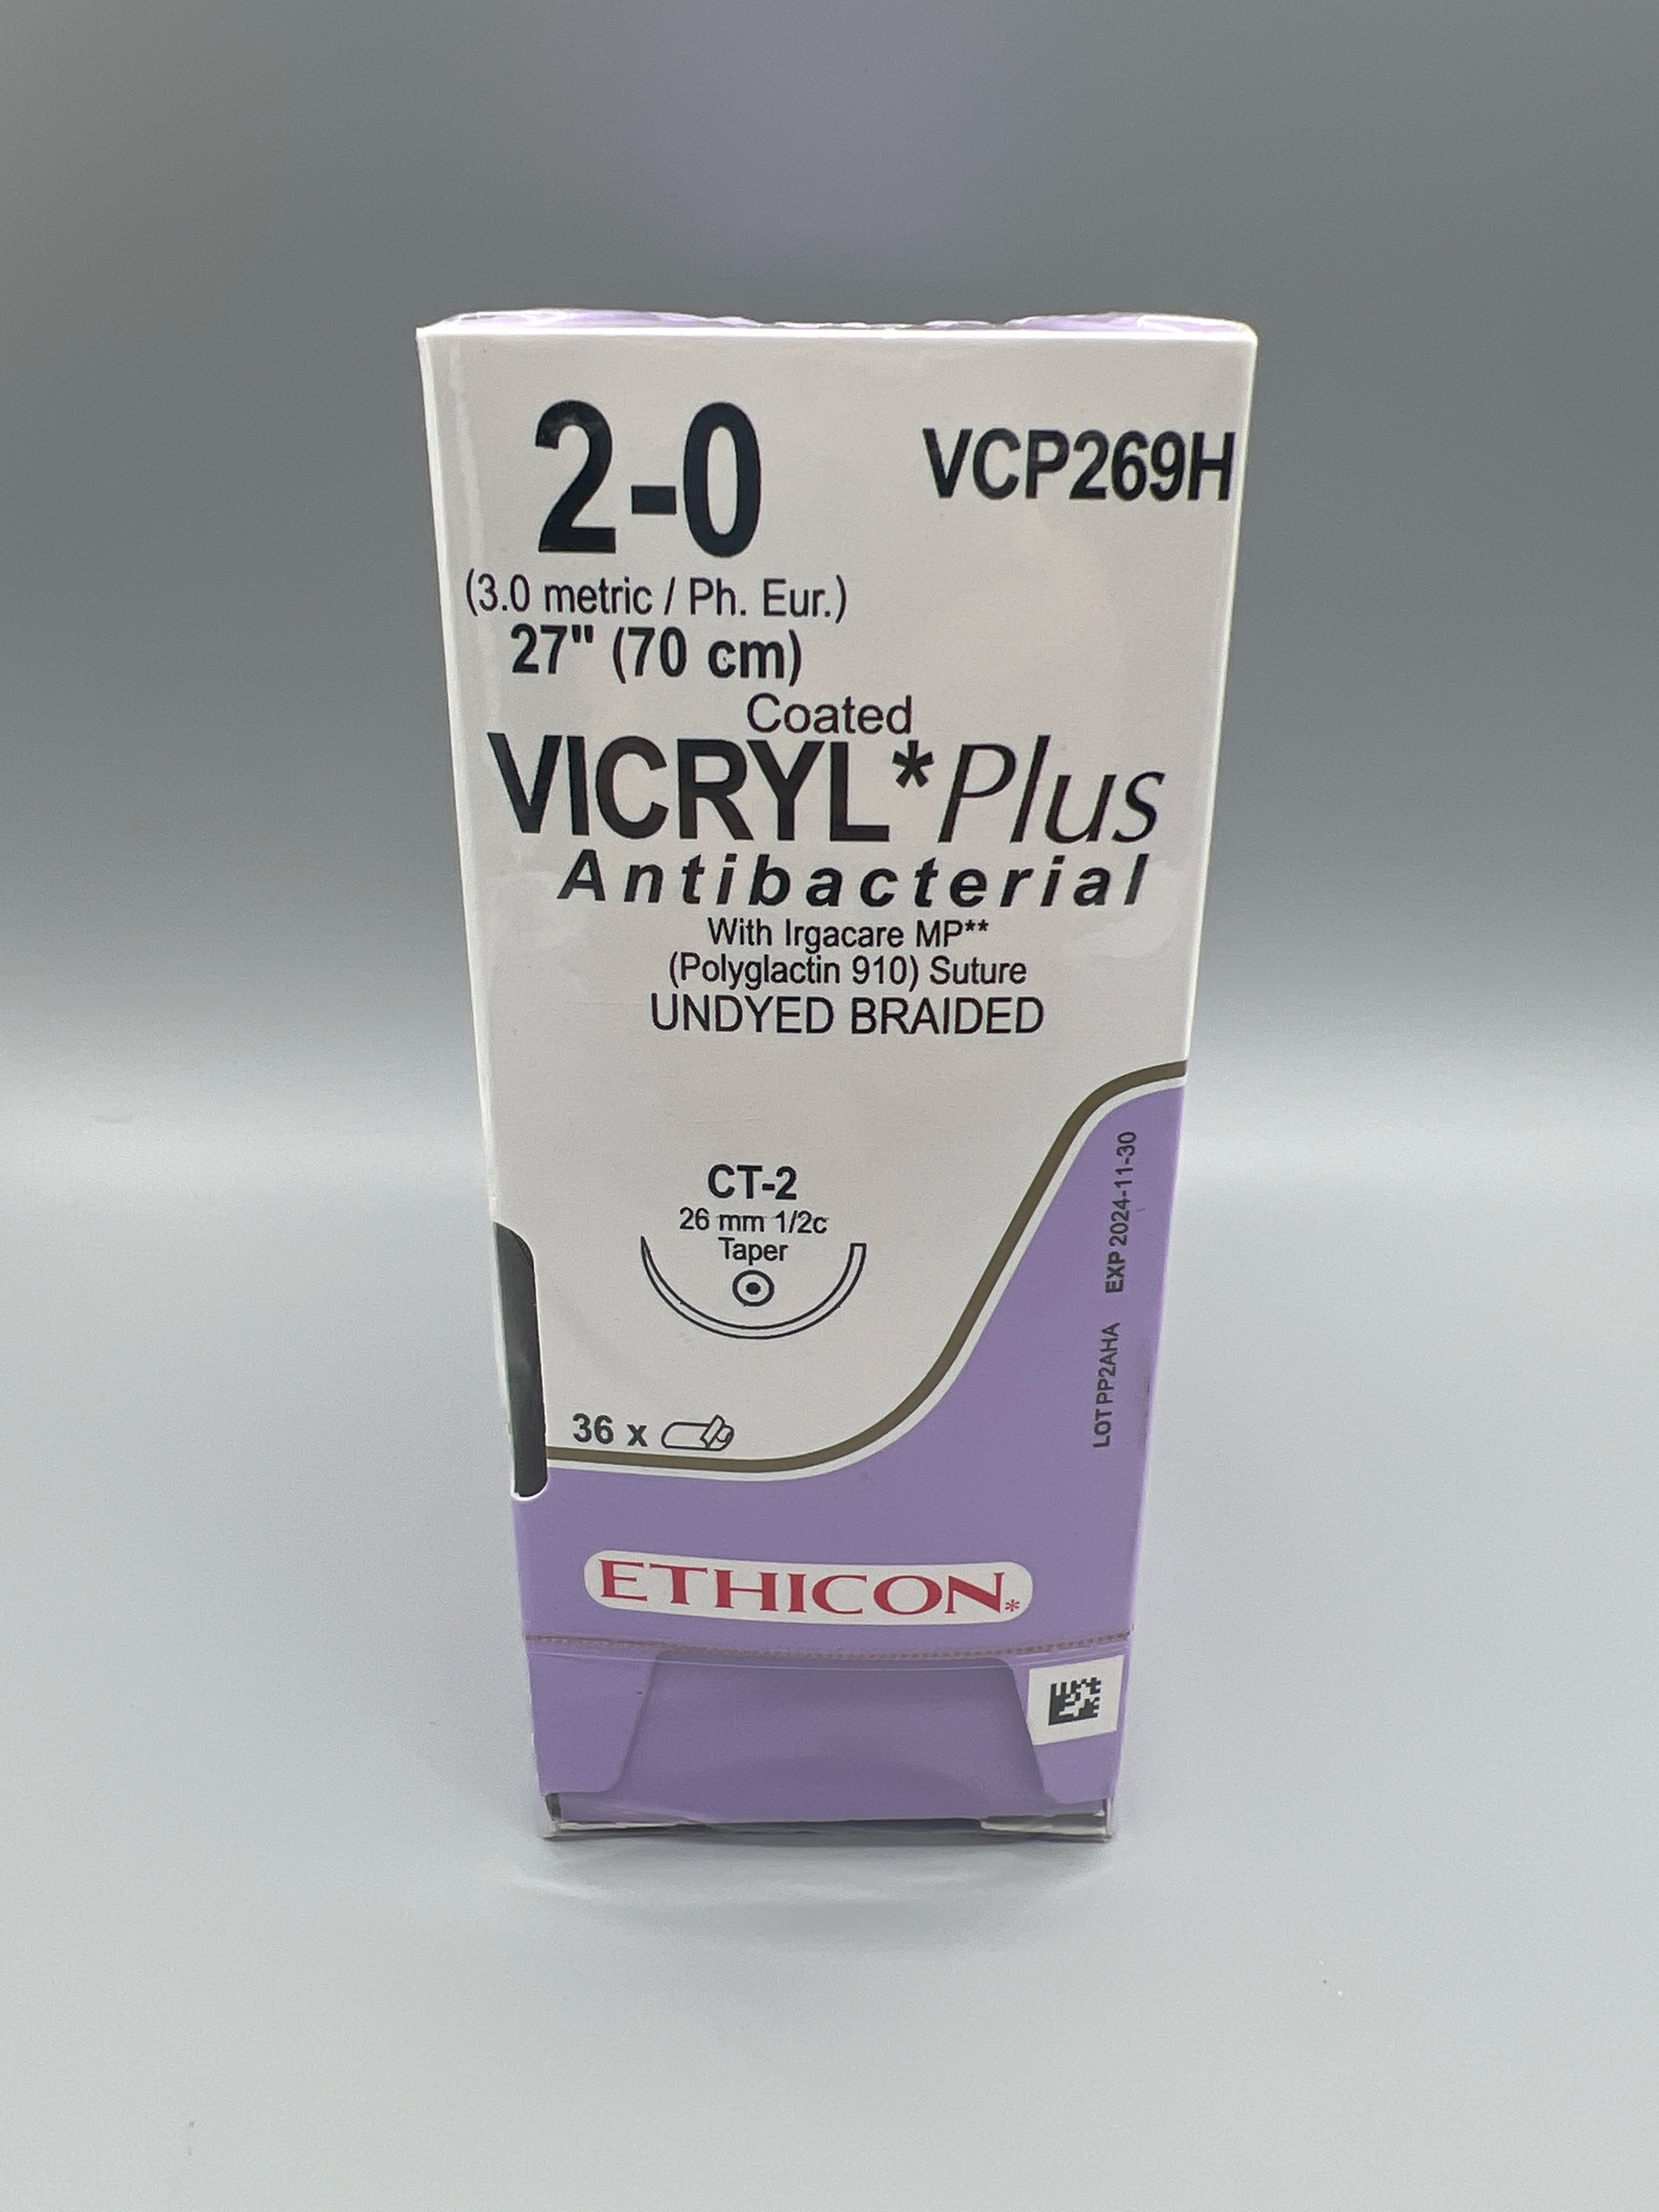 COATED VICRYL PLUS ANTIBACTERIAL (POLYGLACTIN 910) UNDYED BRAIDED CT-2 26MM 1/2C TAPER